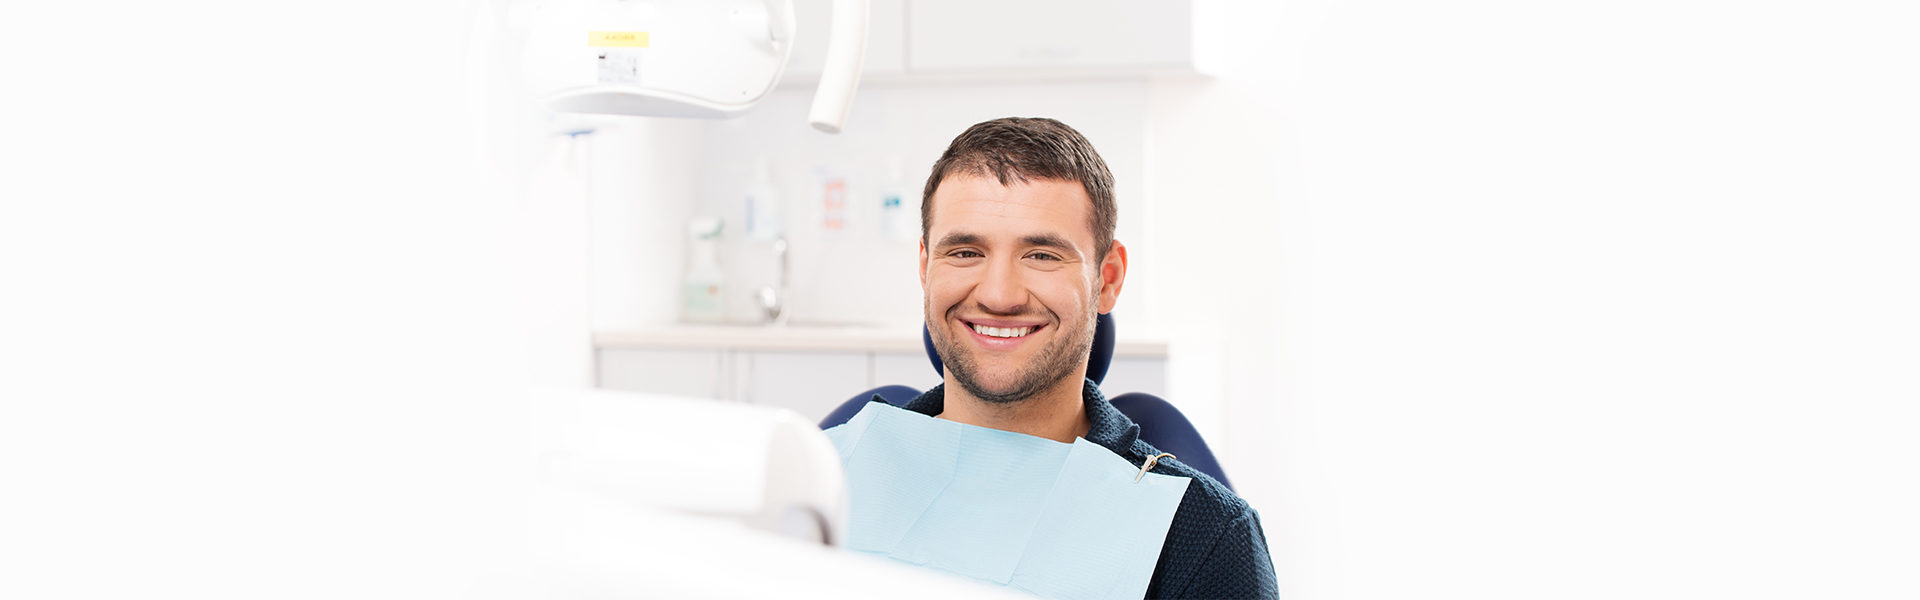 Root Canal Therapy in Rancho Cucamonga, Ca - Relieve Tooth Pain